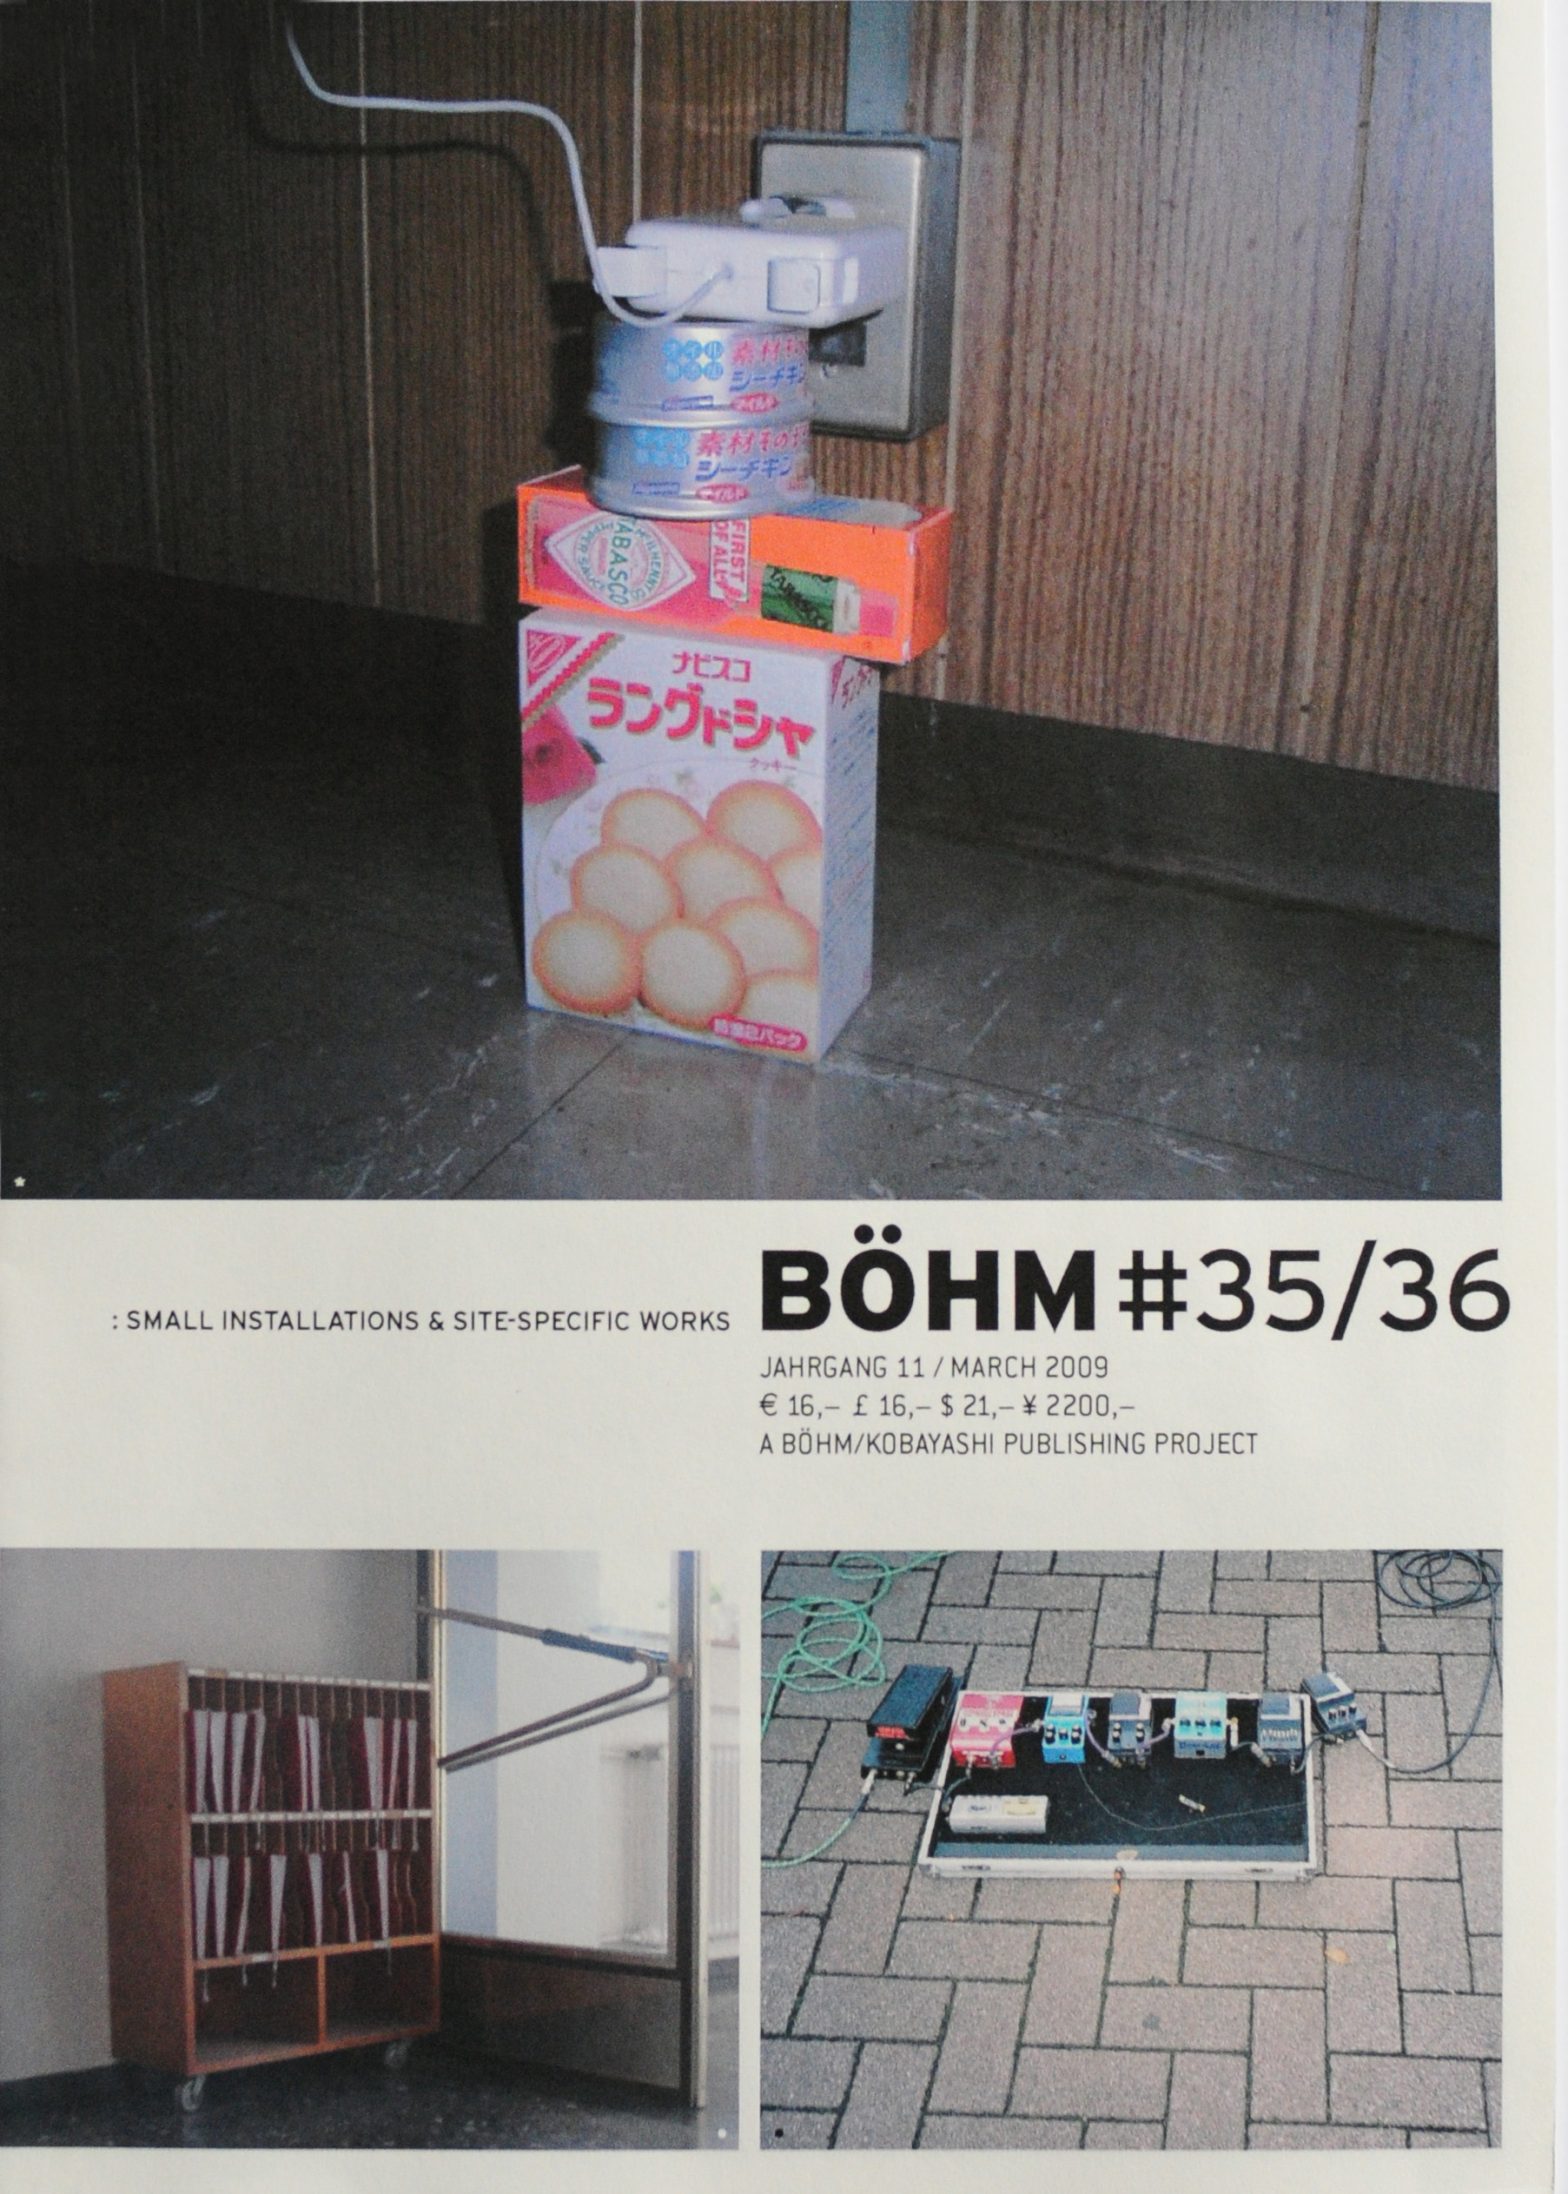 Die Böhm #35:36- Small Installations and Site-Specific Works